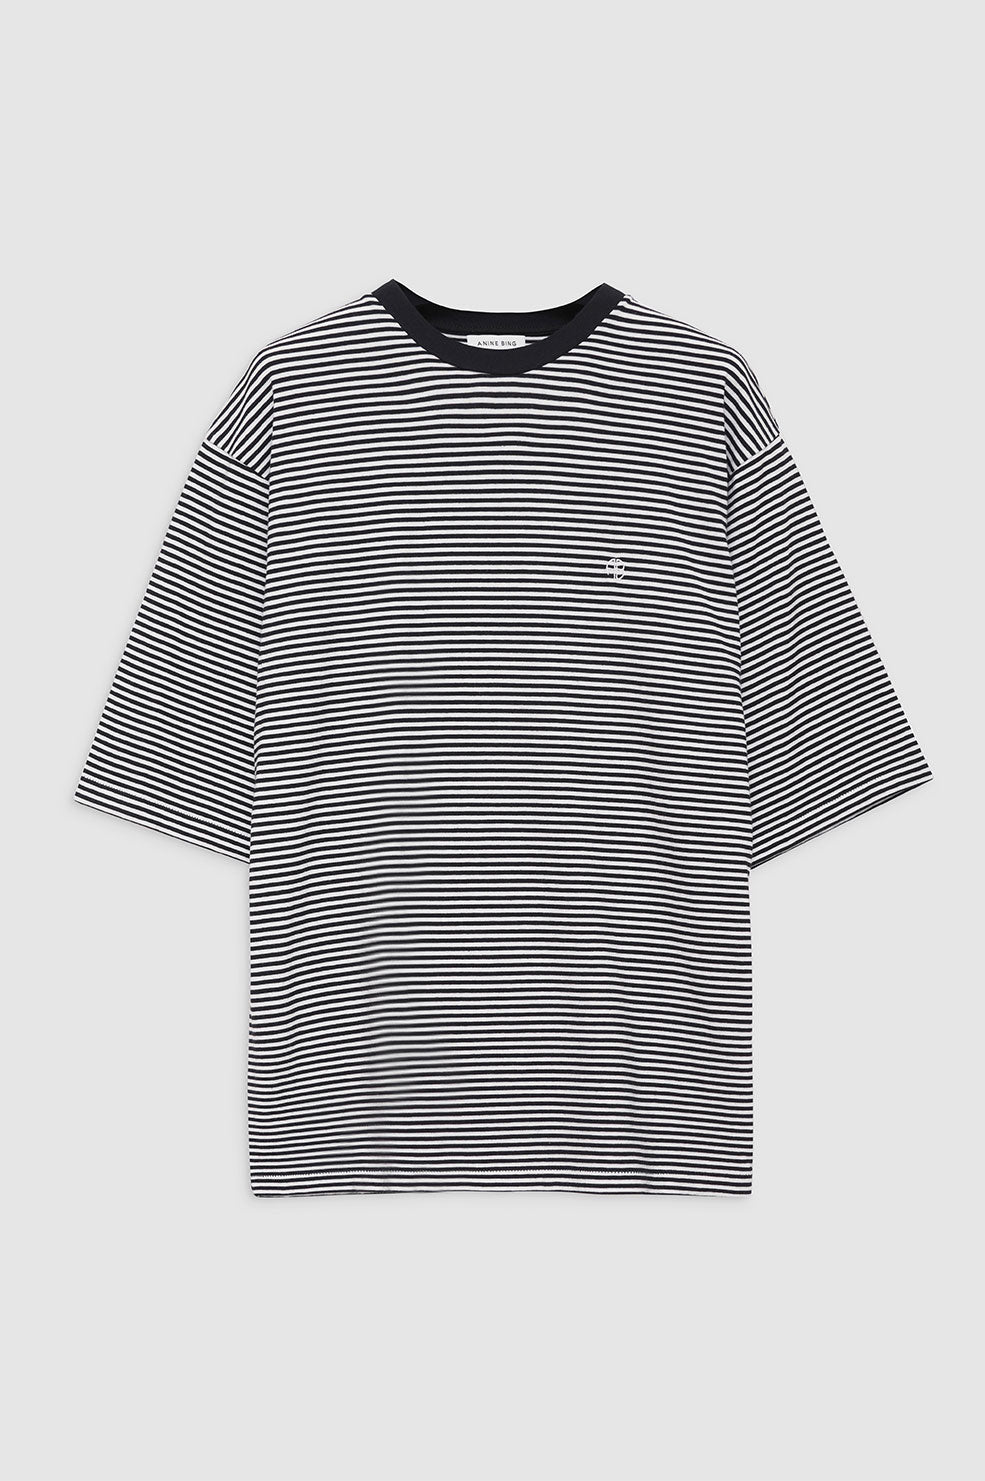 ANINE BING Bo Tee - Black And White Stripe - Front View